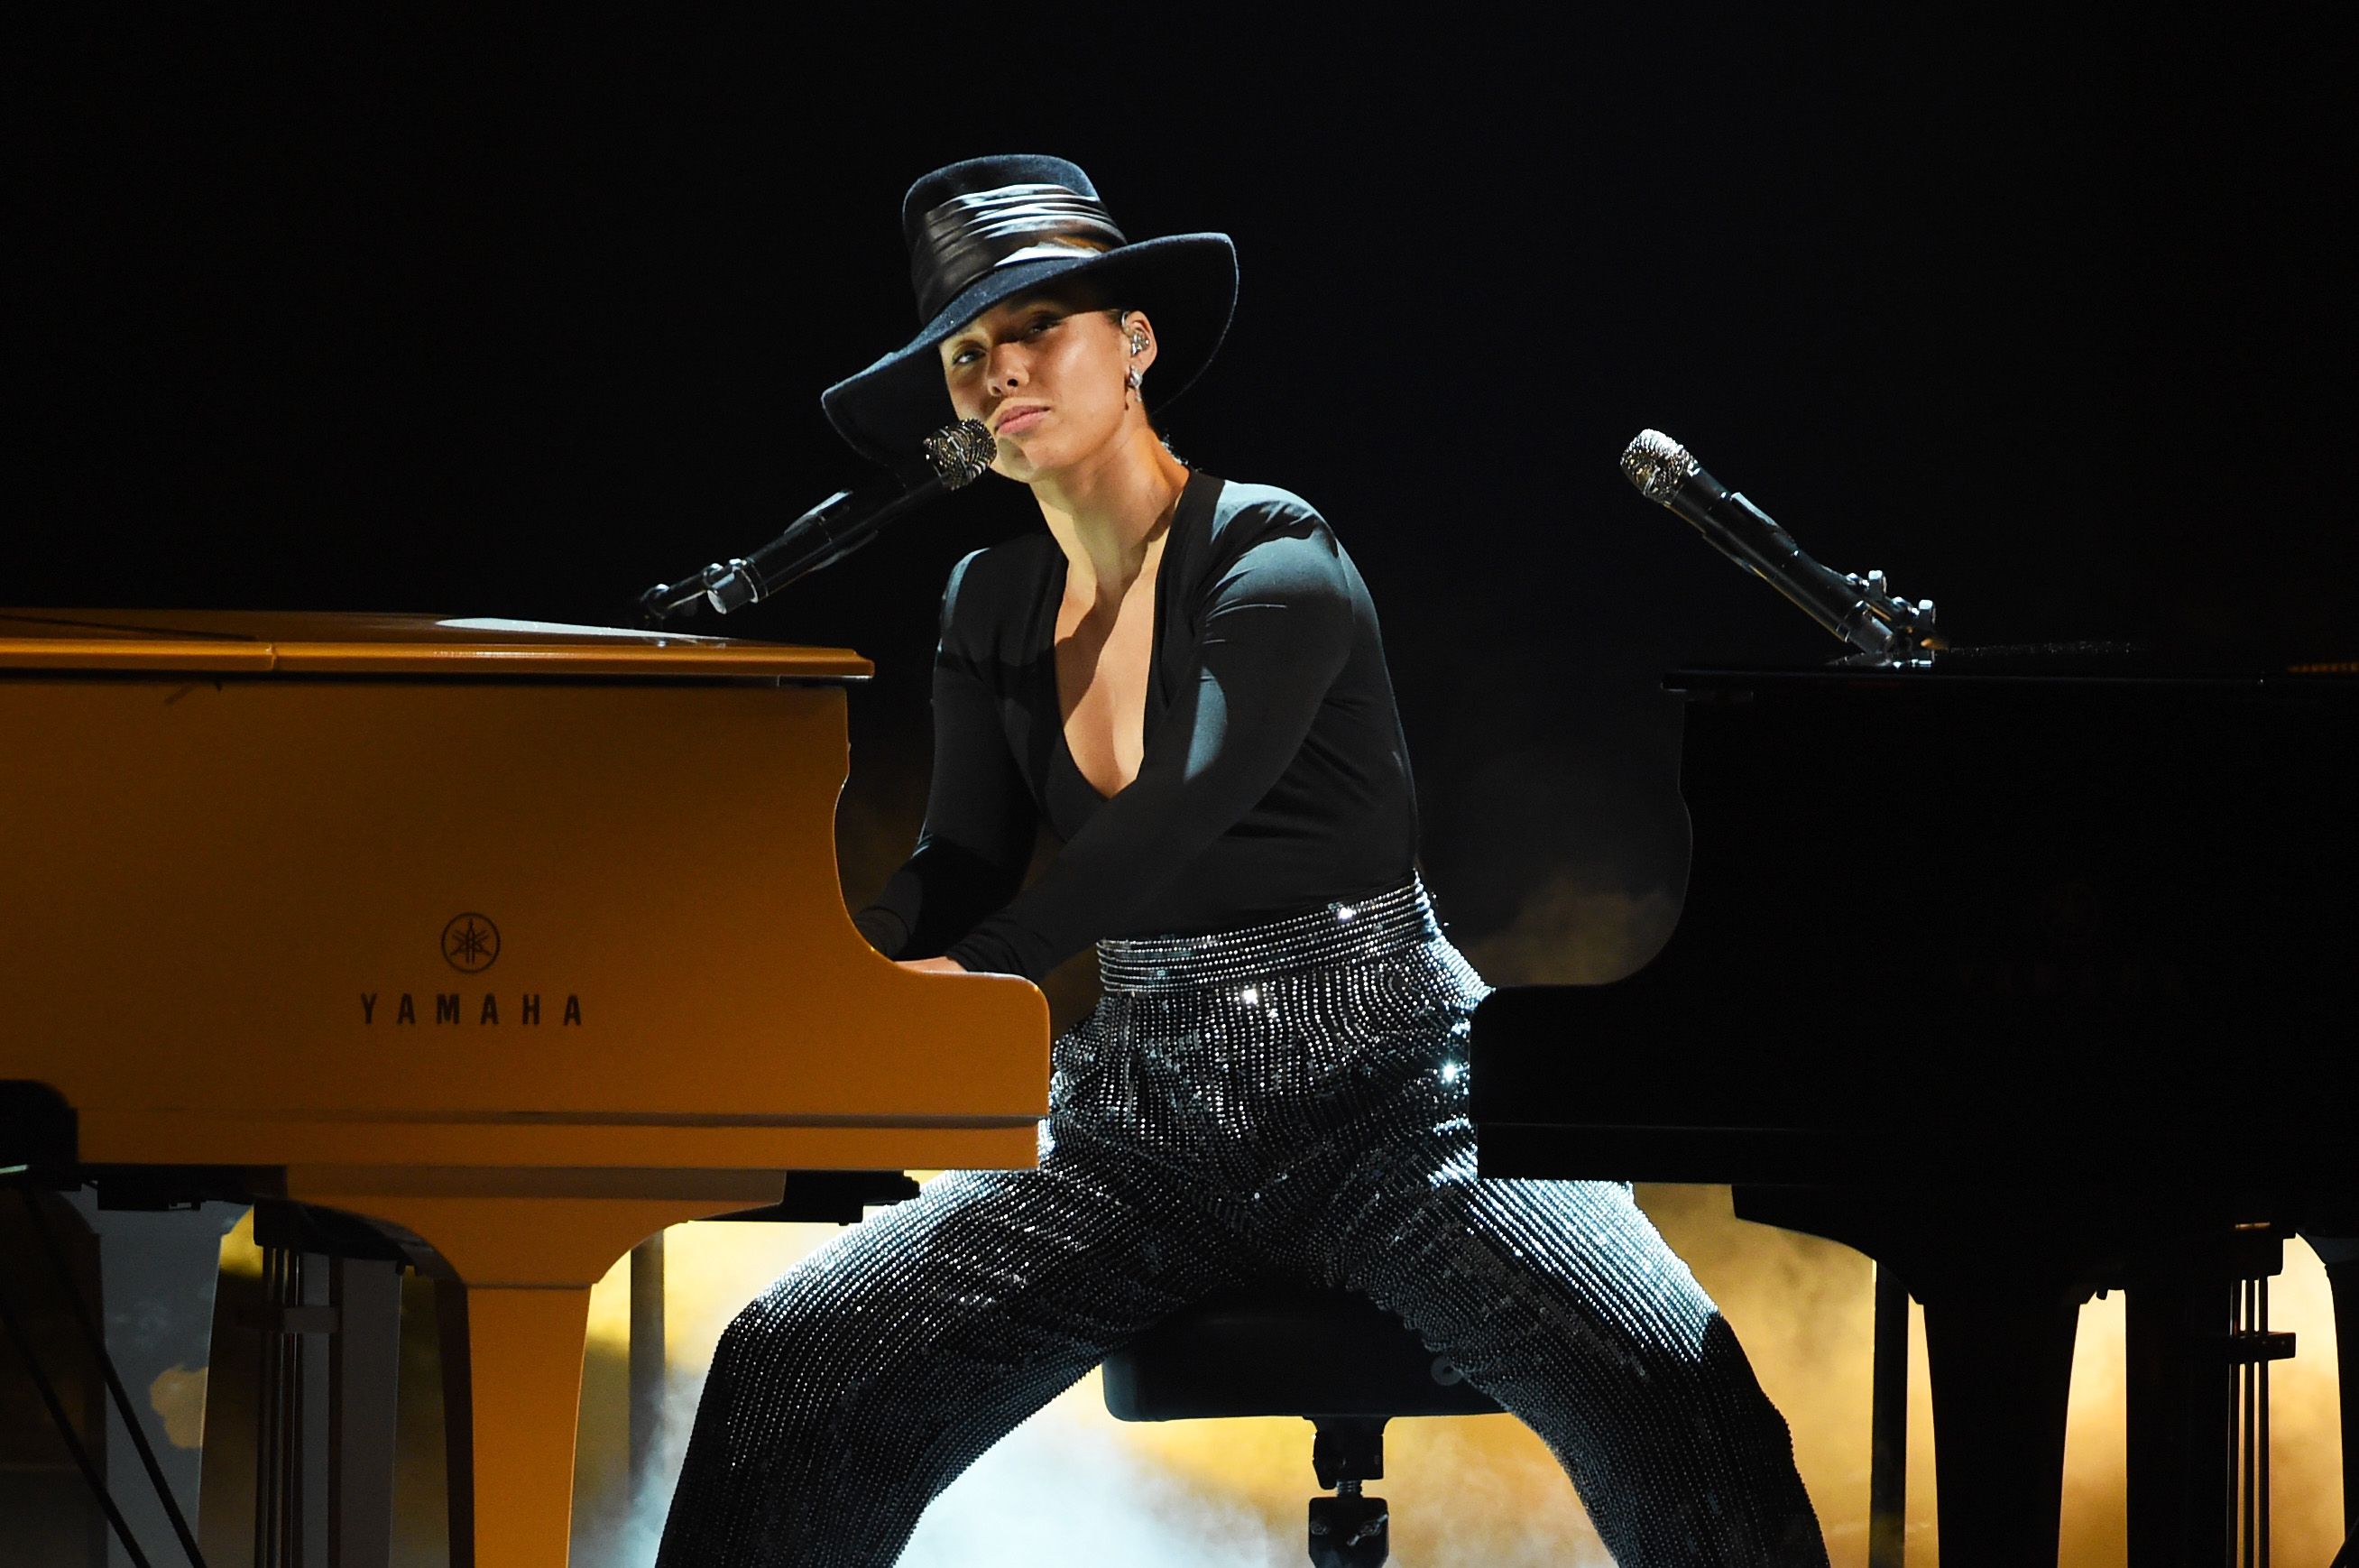 22 Of The Best Alicia Keys Songs To Add To Your Playlist